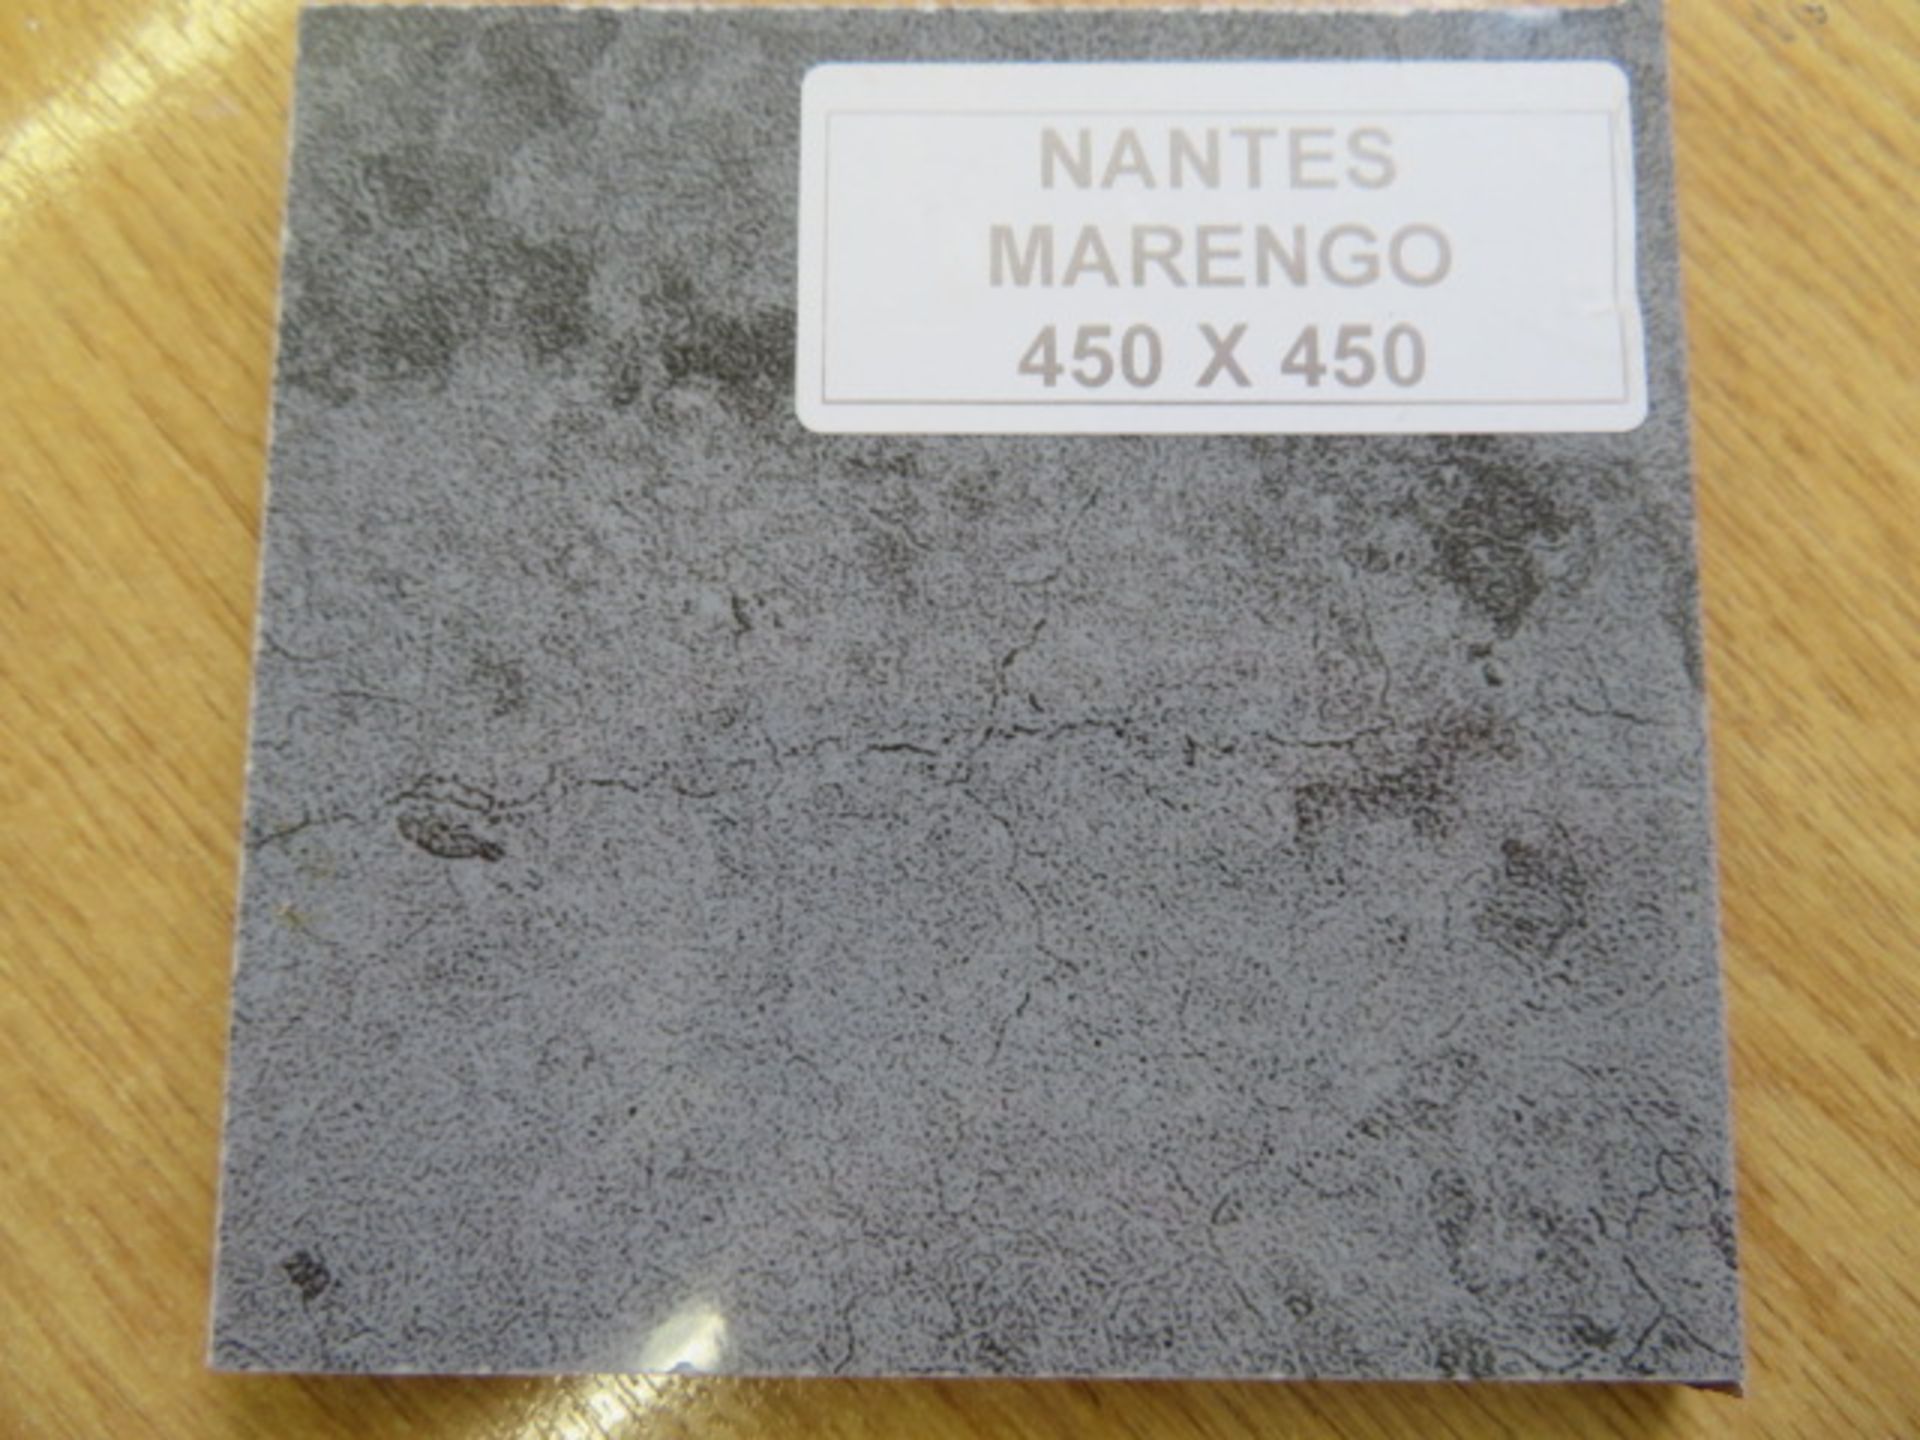 NEW 7.2 Square Meters of Nantes Marengo Wall and Floor Tiles. 450x450mm per tile, 8mm thi... - Image 2 of 3